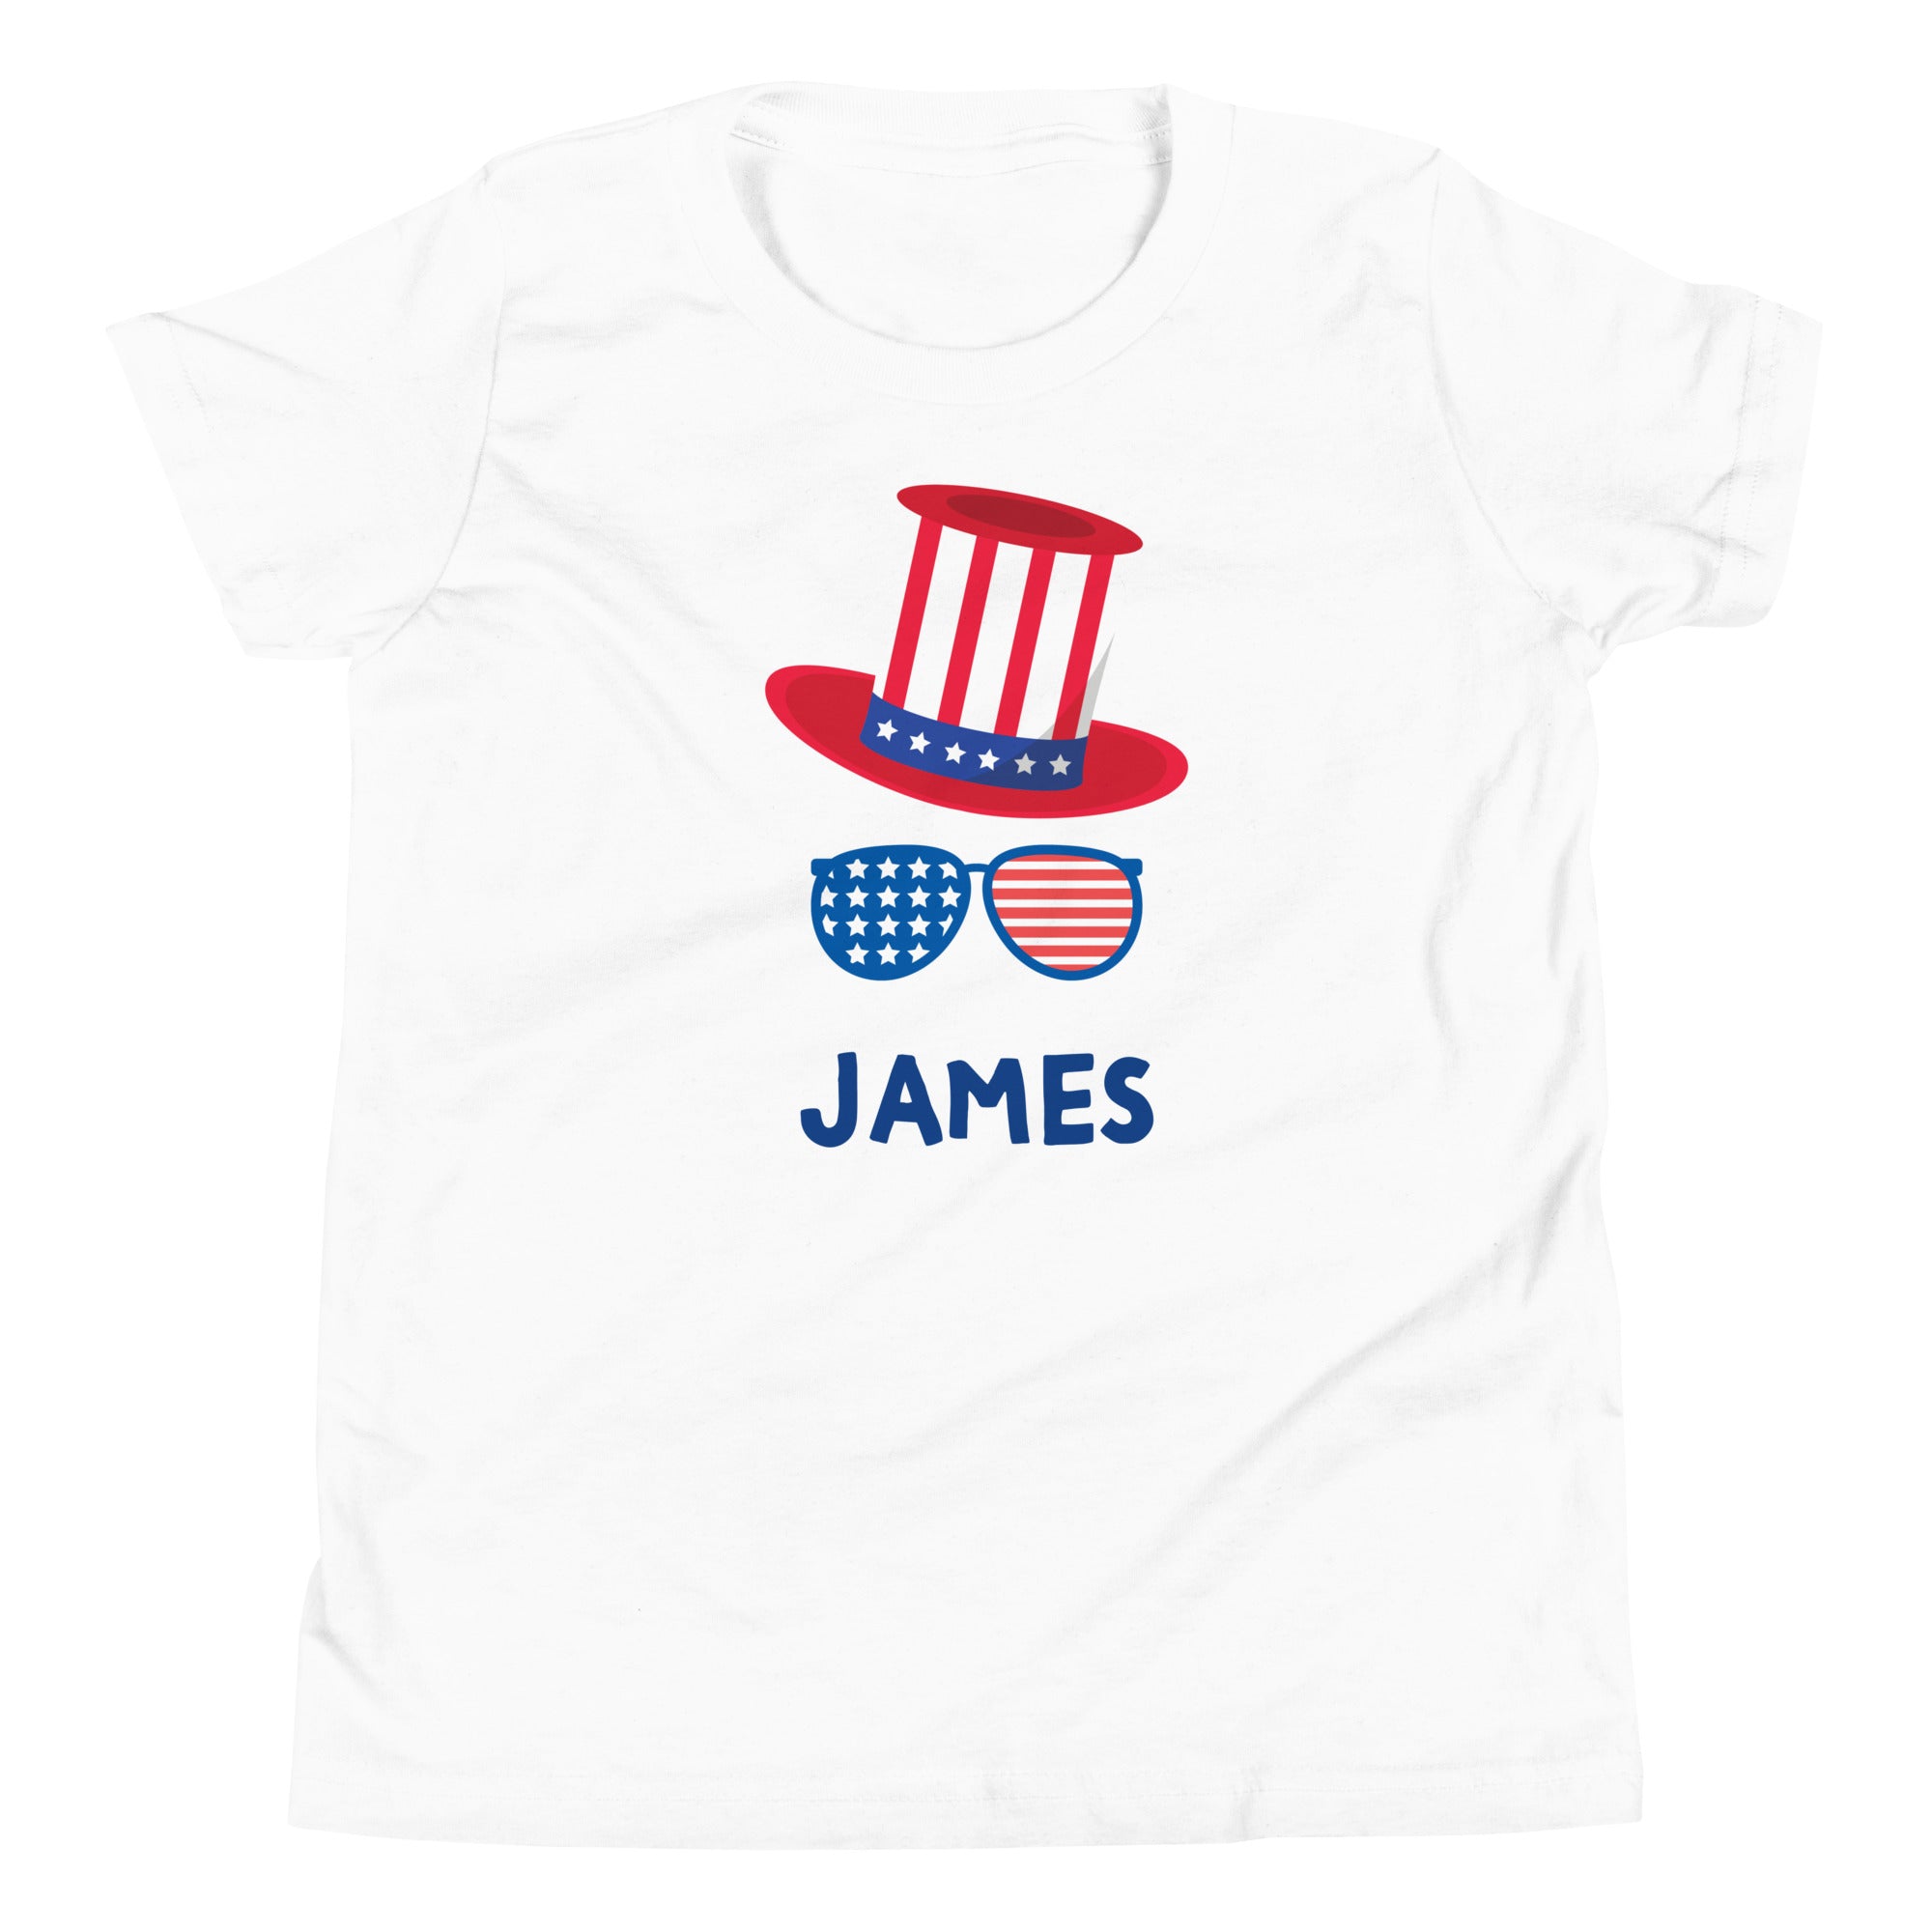 Personalized kid's tee for festive celebration of any US holidays